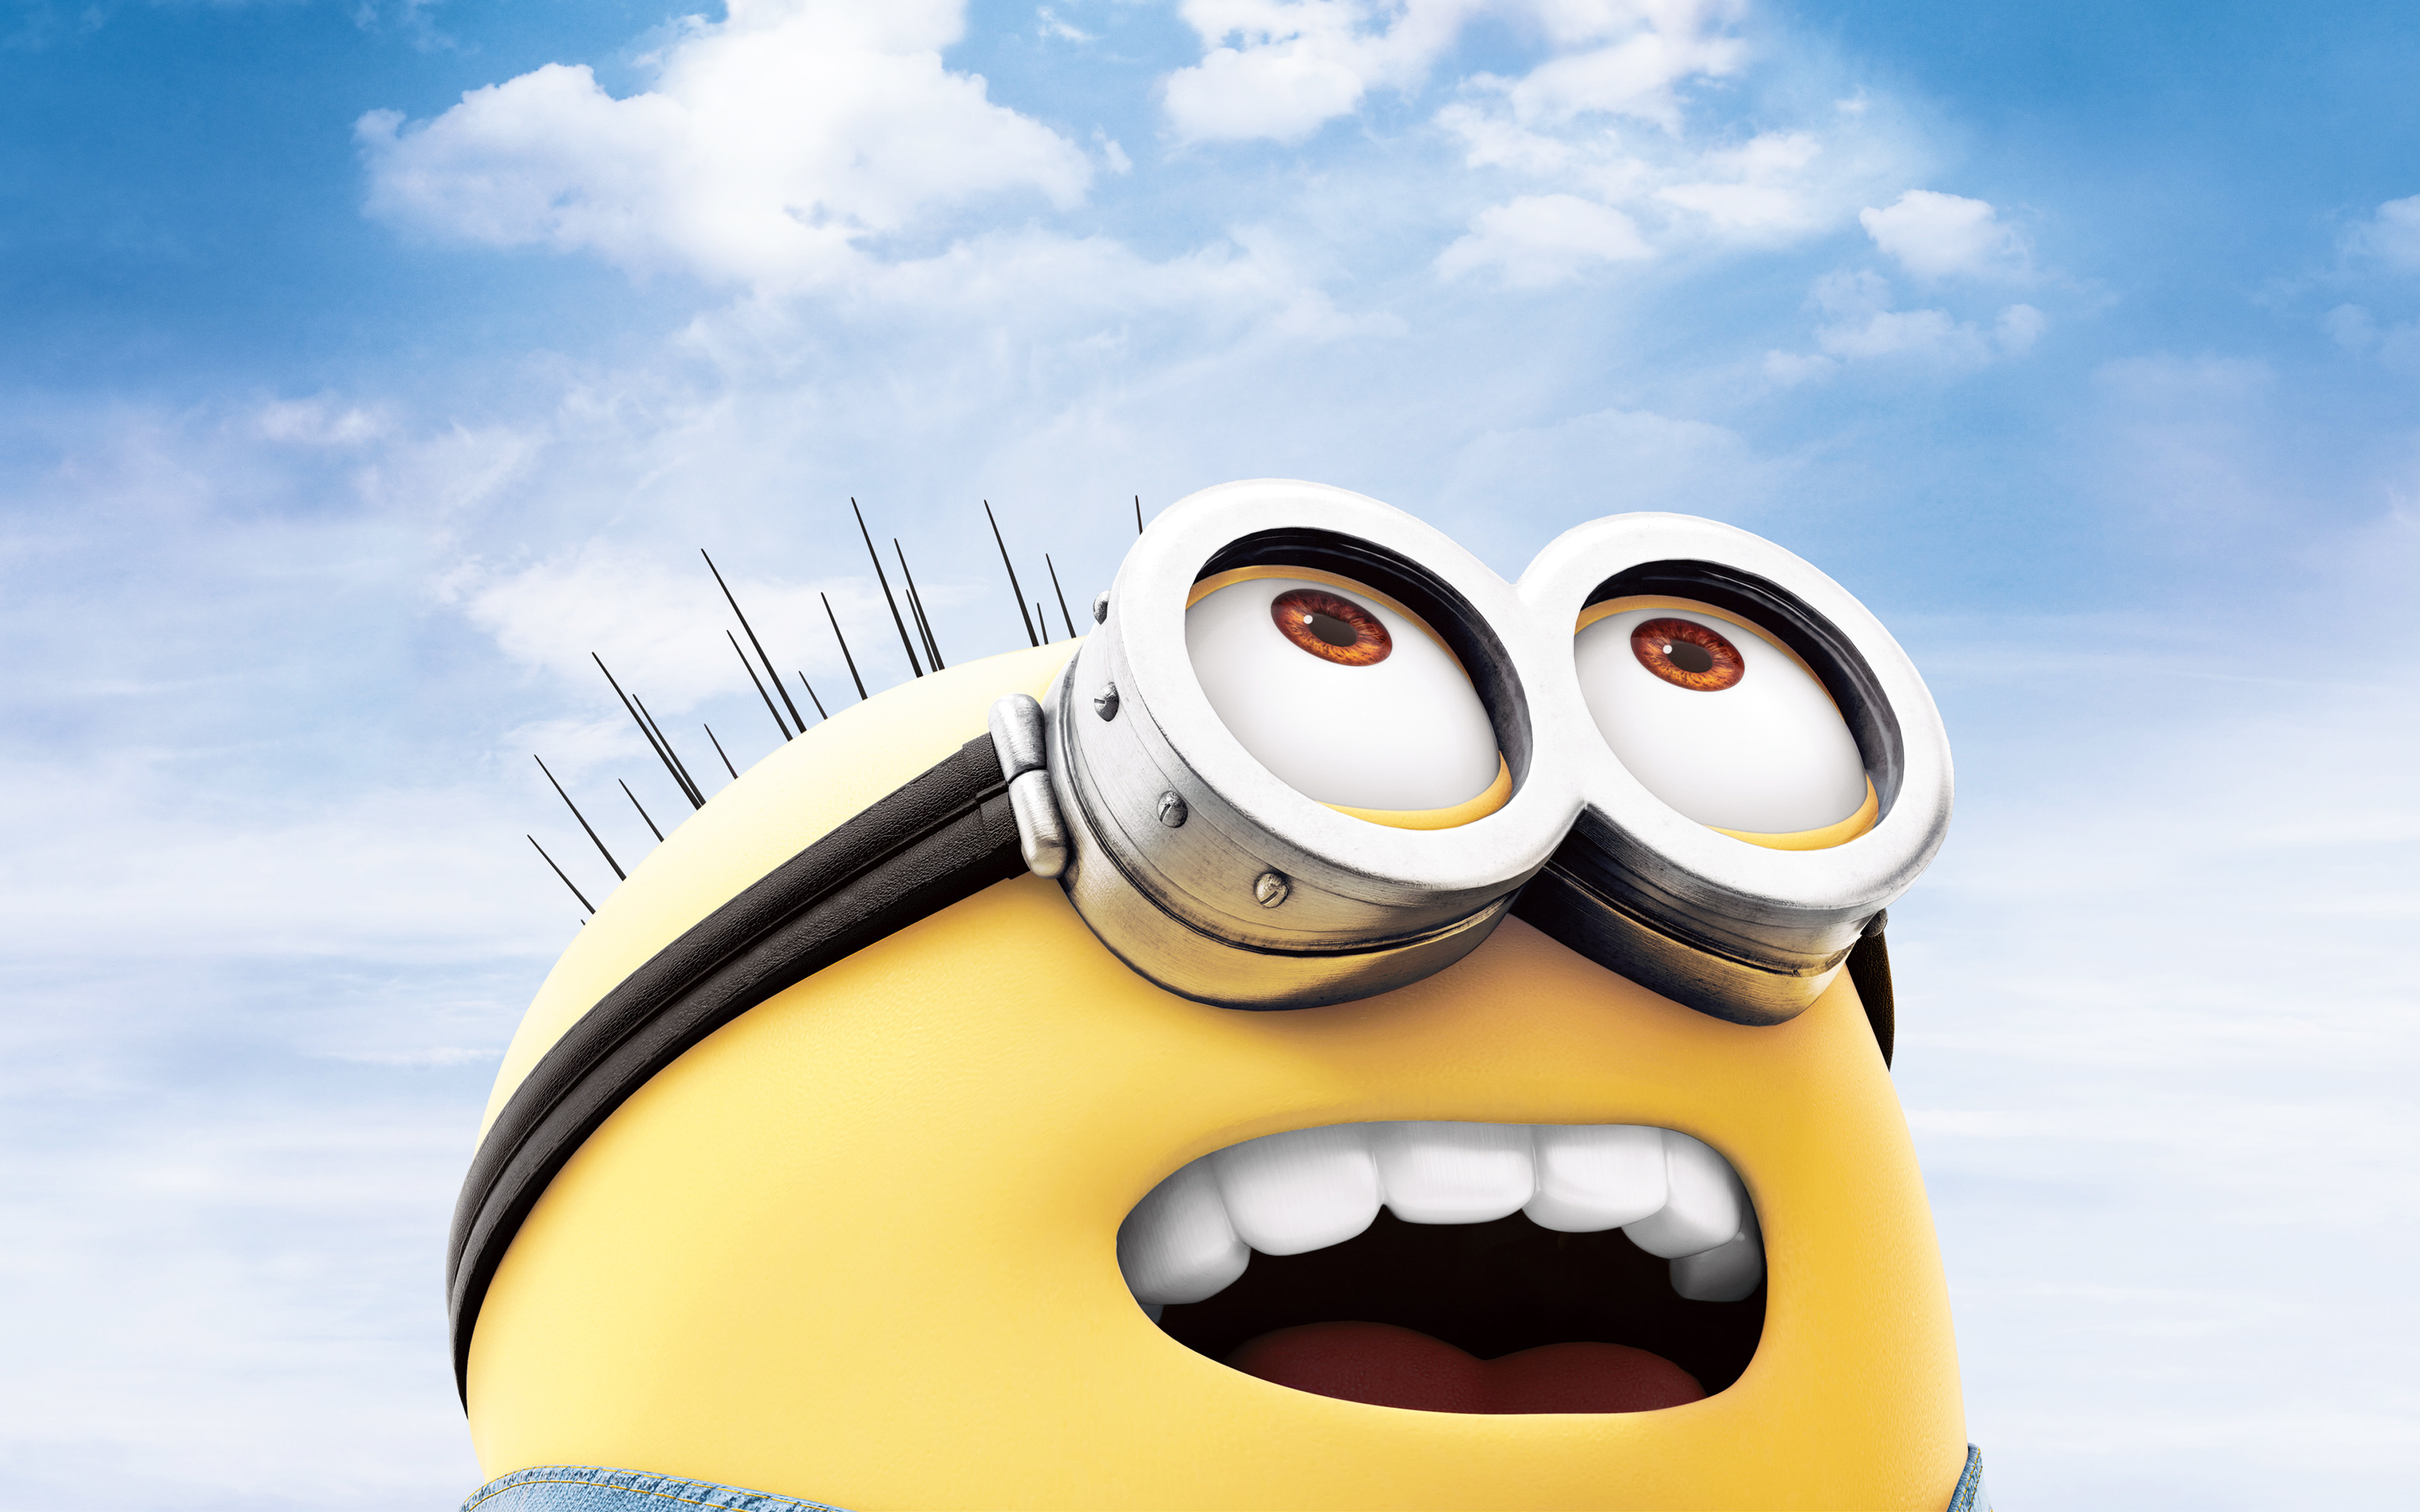 despicable me, movie, despicable me 2 Full HD